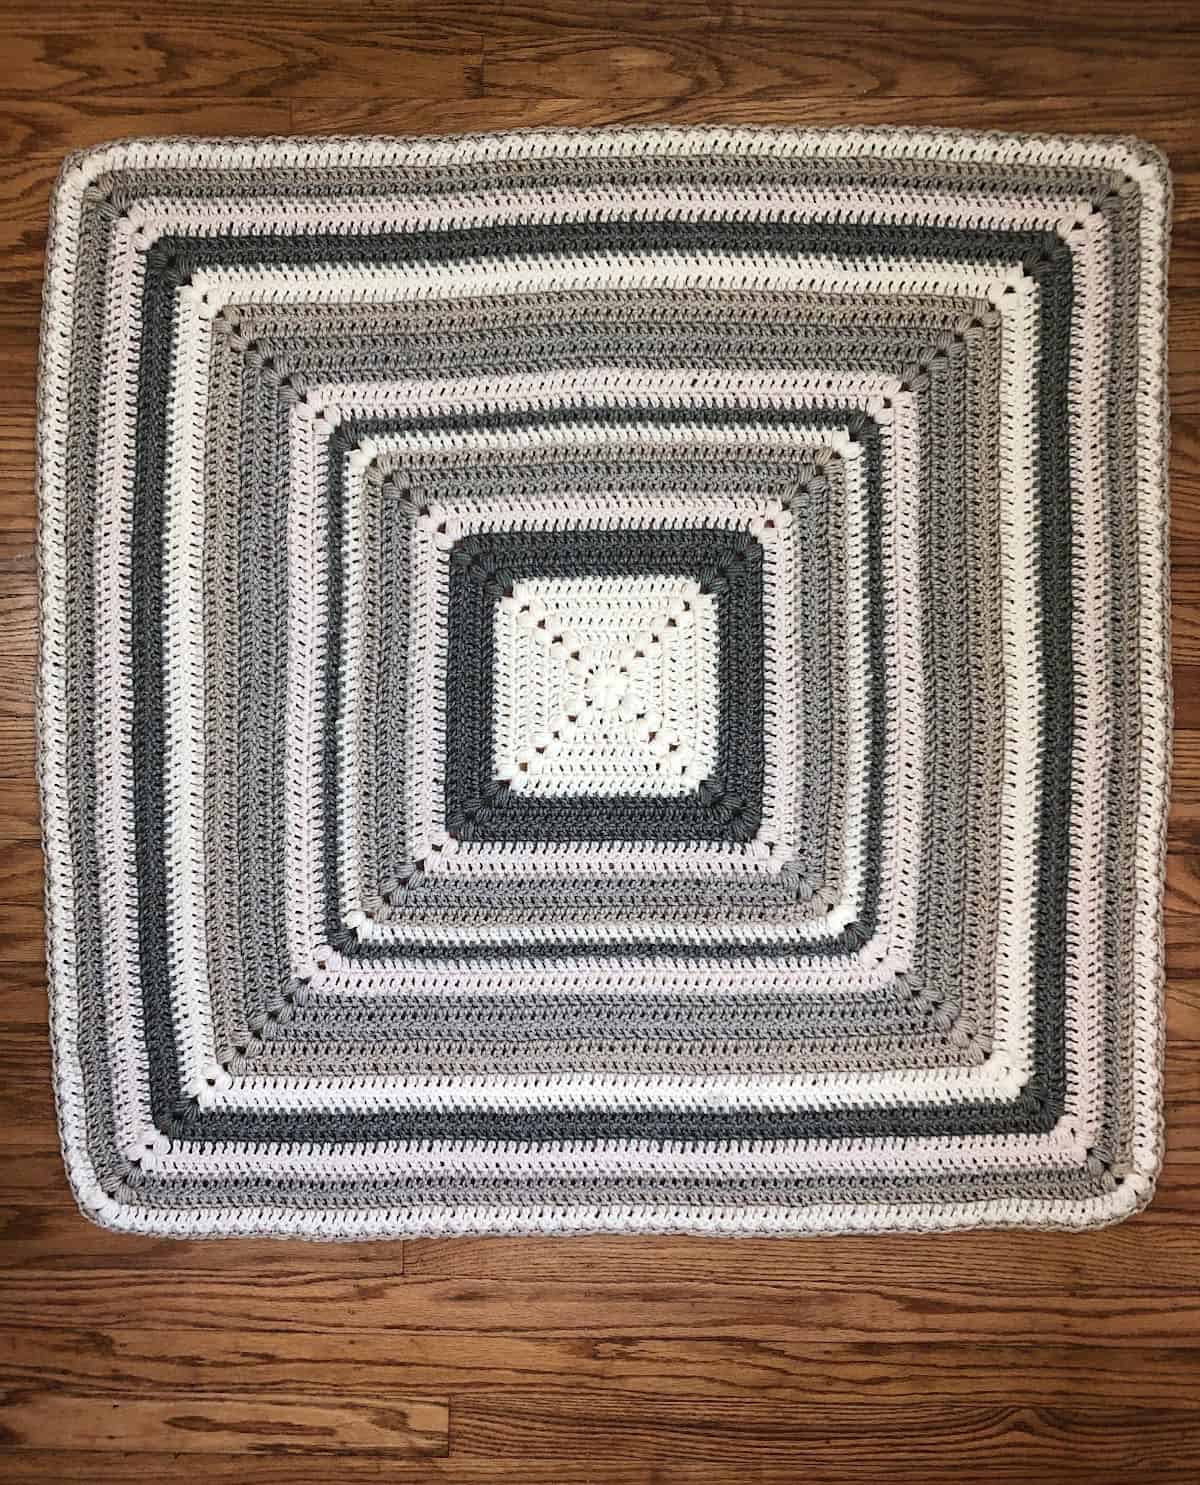 Center out crochet blanket in grey and white laid out flat on wood floor.